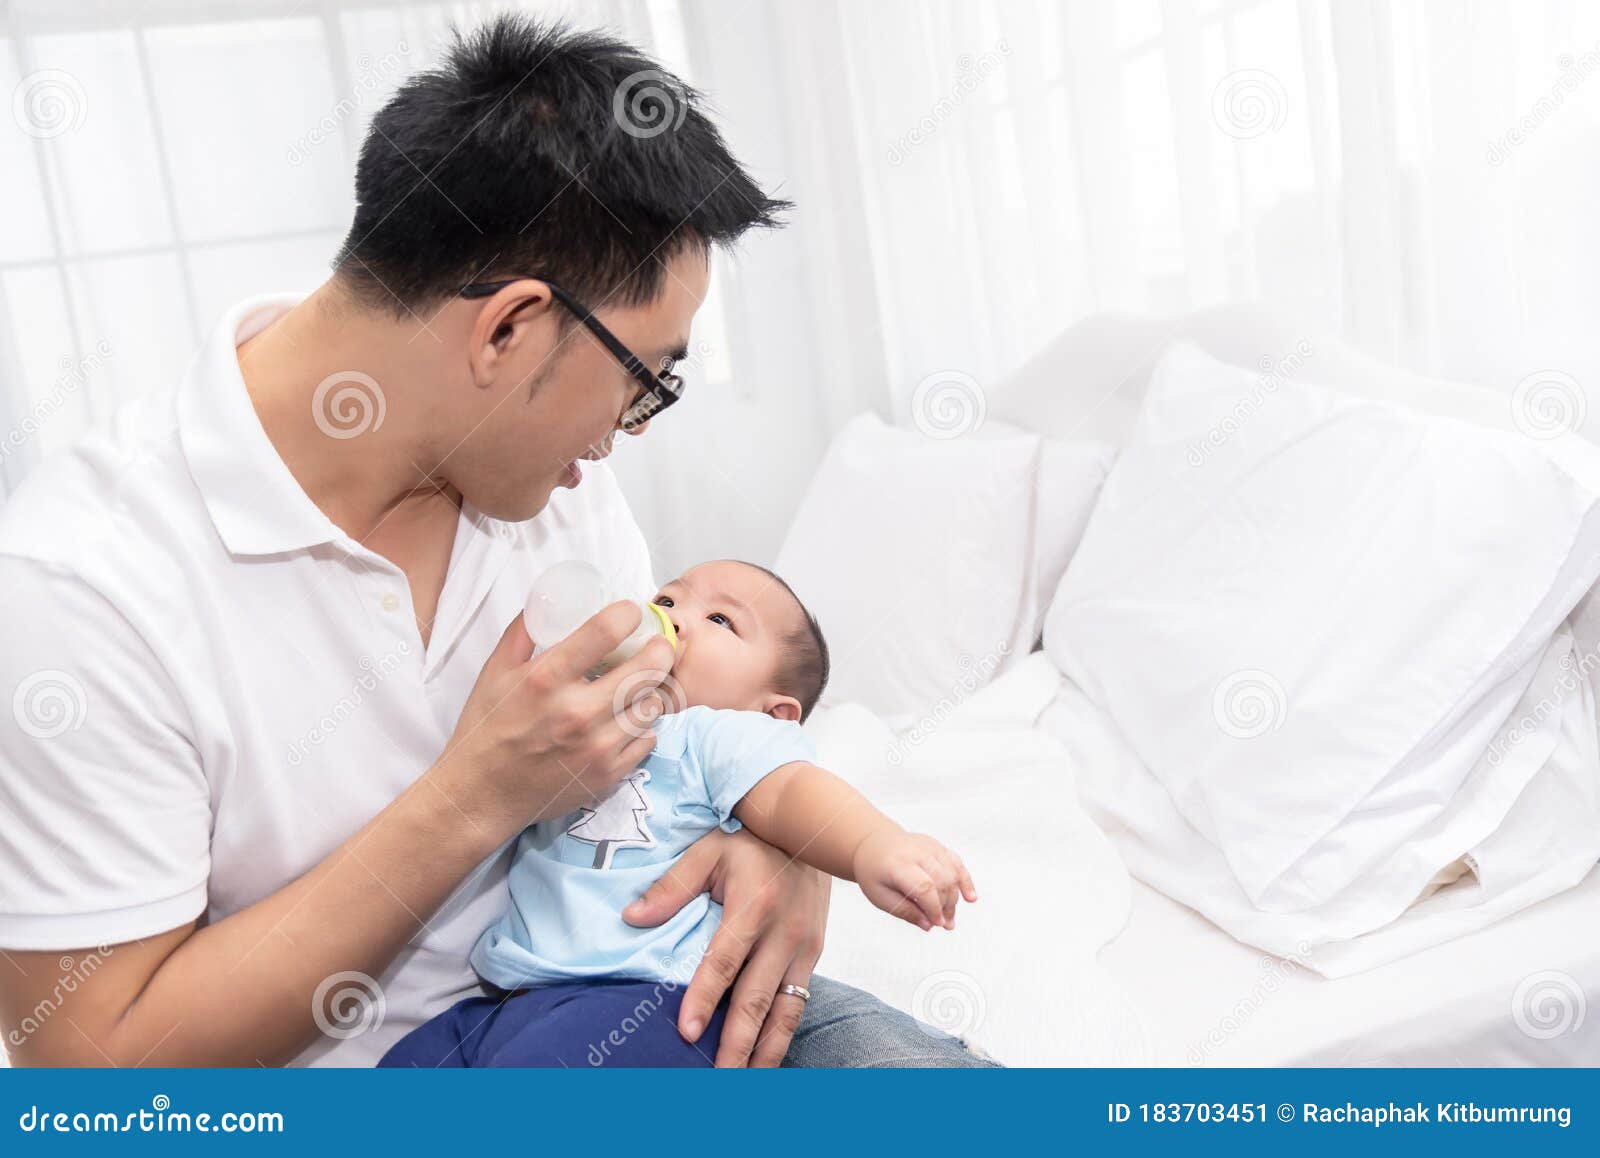 young asian father spending time, take care of baby at home. fatherhood, family concept